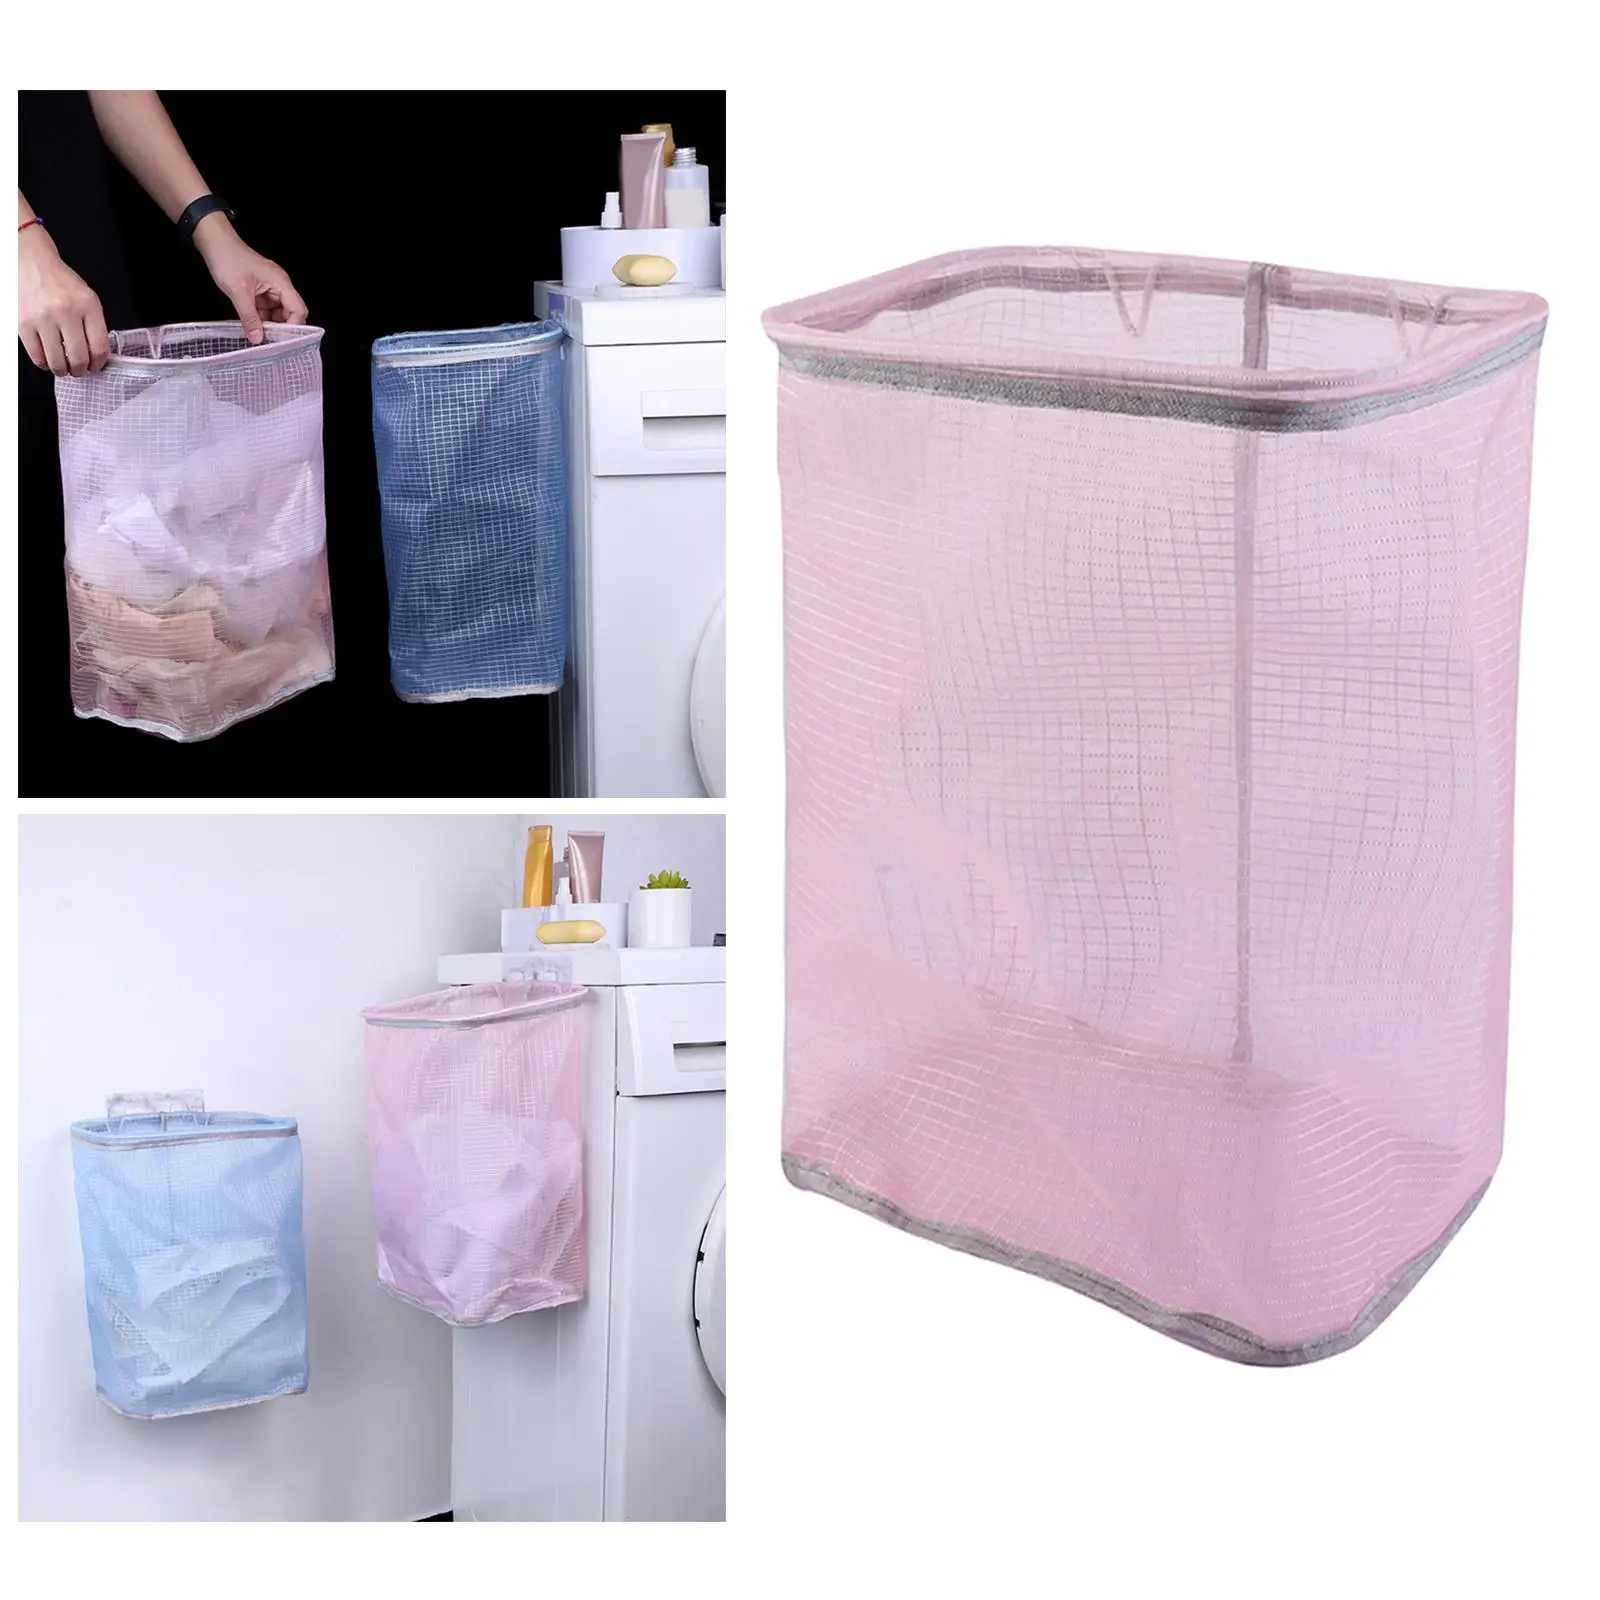 Collapsible Laundry Hamper Hanging Organizer Durable for Bathroom Dormitory